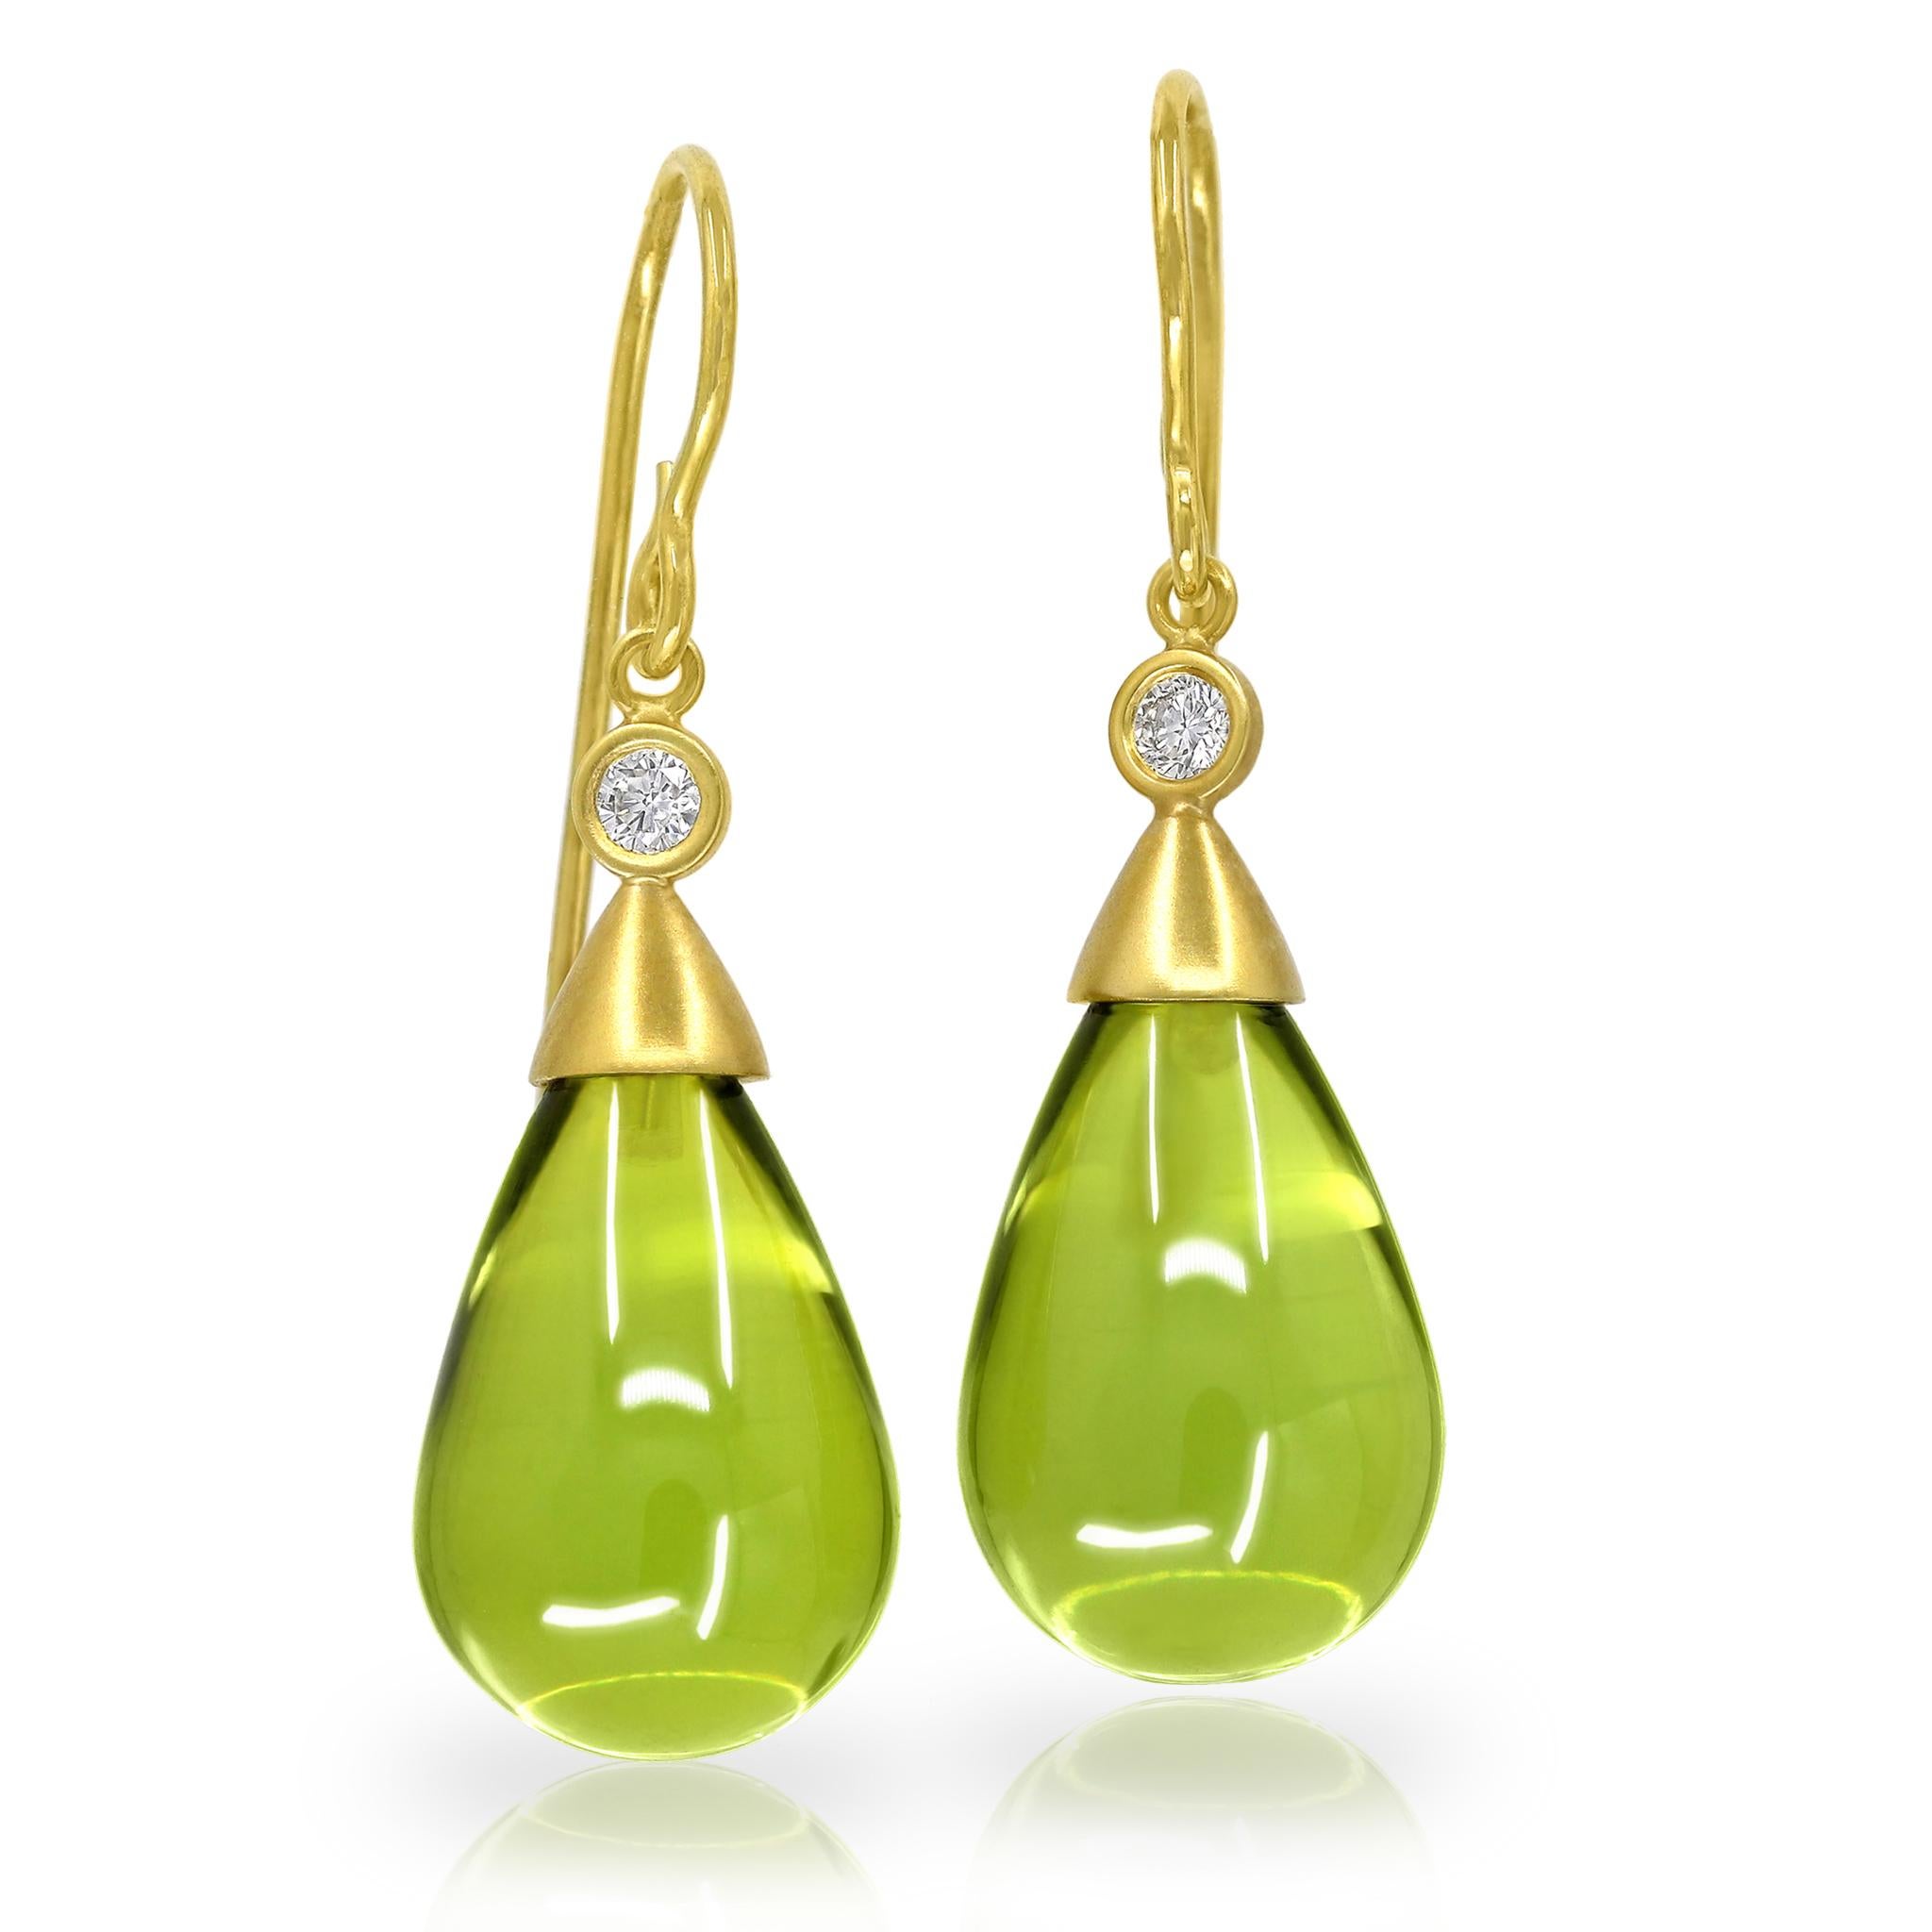 One-of-a-Kind Drop Earrings handcrafted by jewelry maker Susan Sadler featuring a gorgeous matched pair of smooth green amber cabochons set in matte and satin-finished 18.5k yellow gold with two bezel-set round brilliant-cut F/vs1 white diamonds